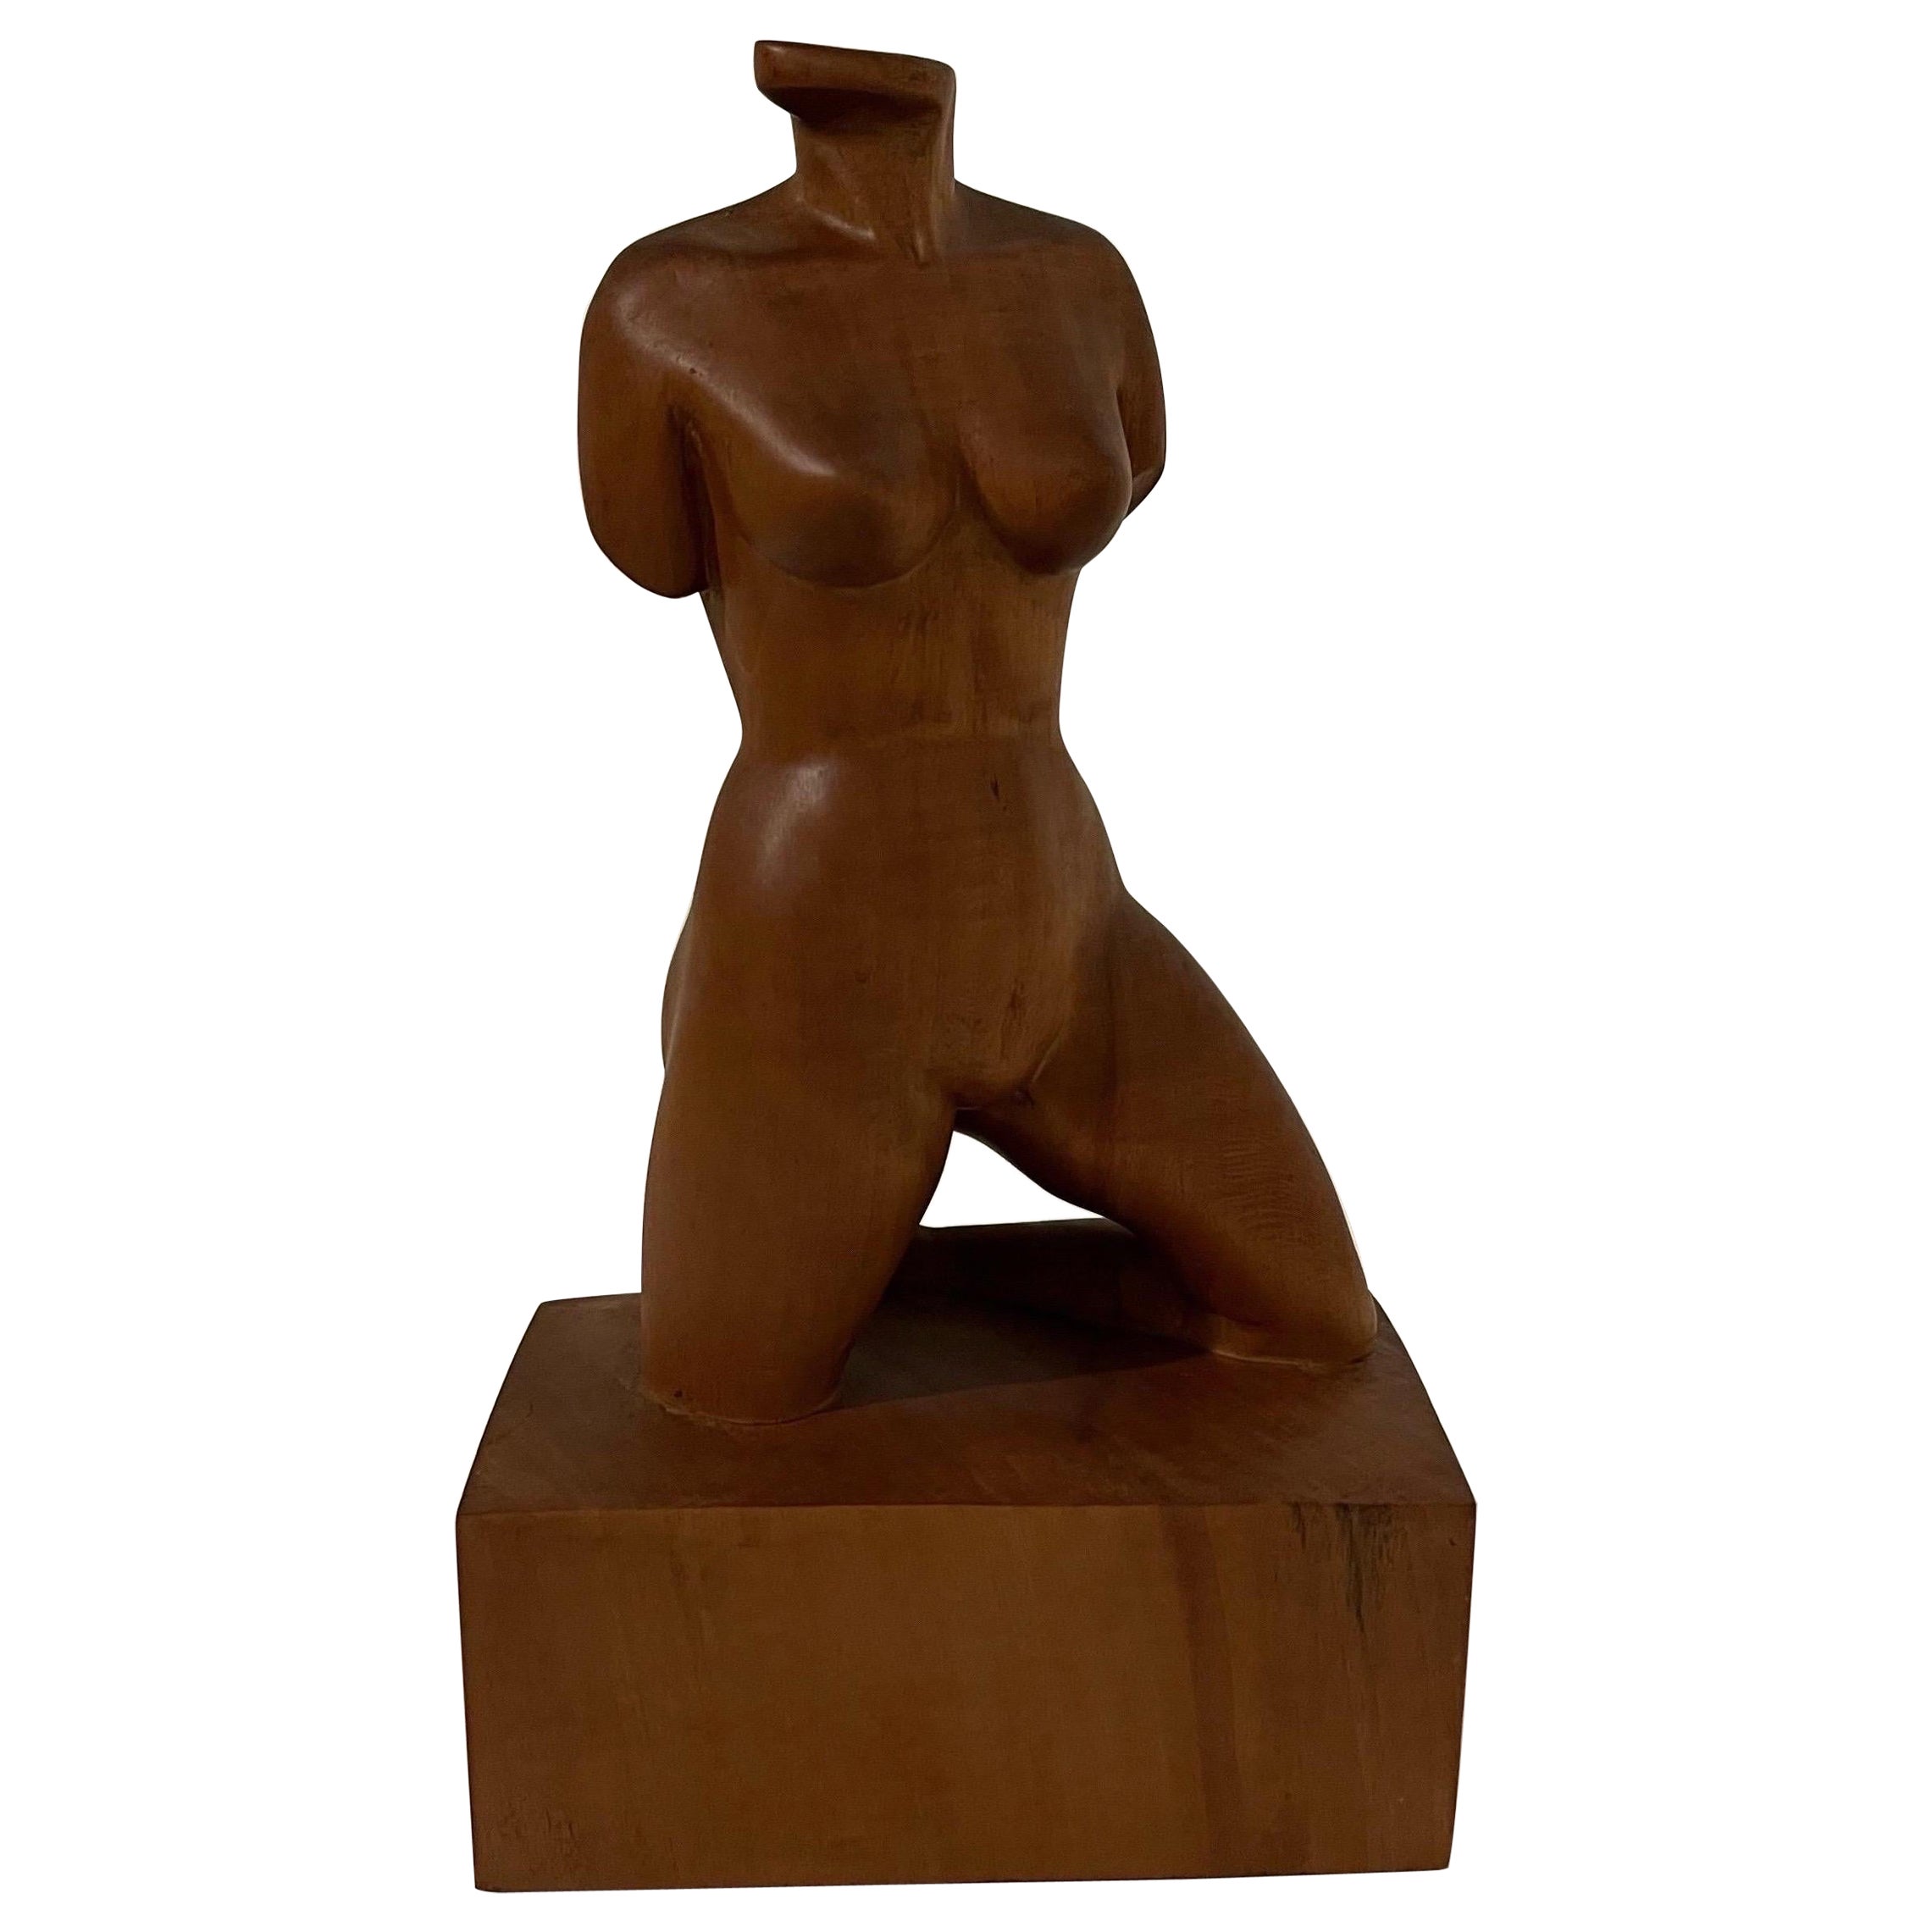 Female Nude Figure Bust Wood Carving 1960s sculpture 